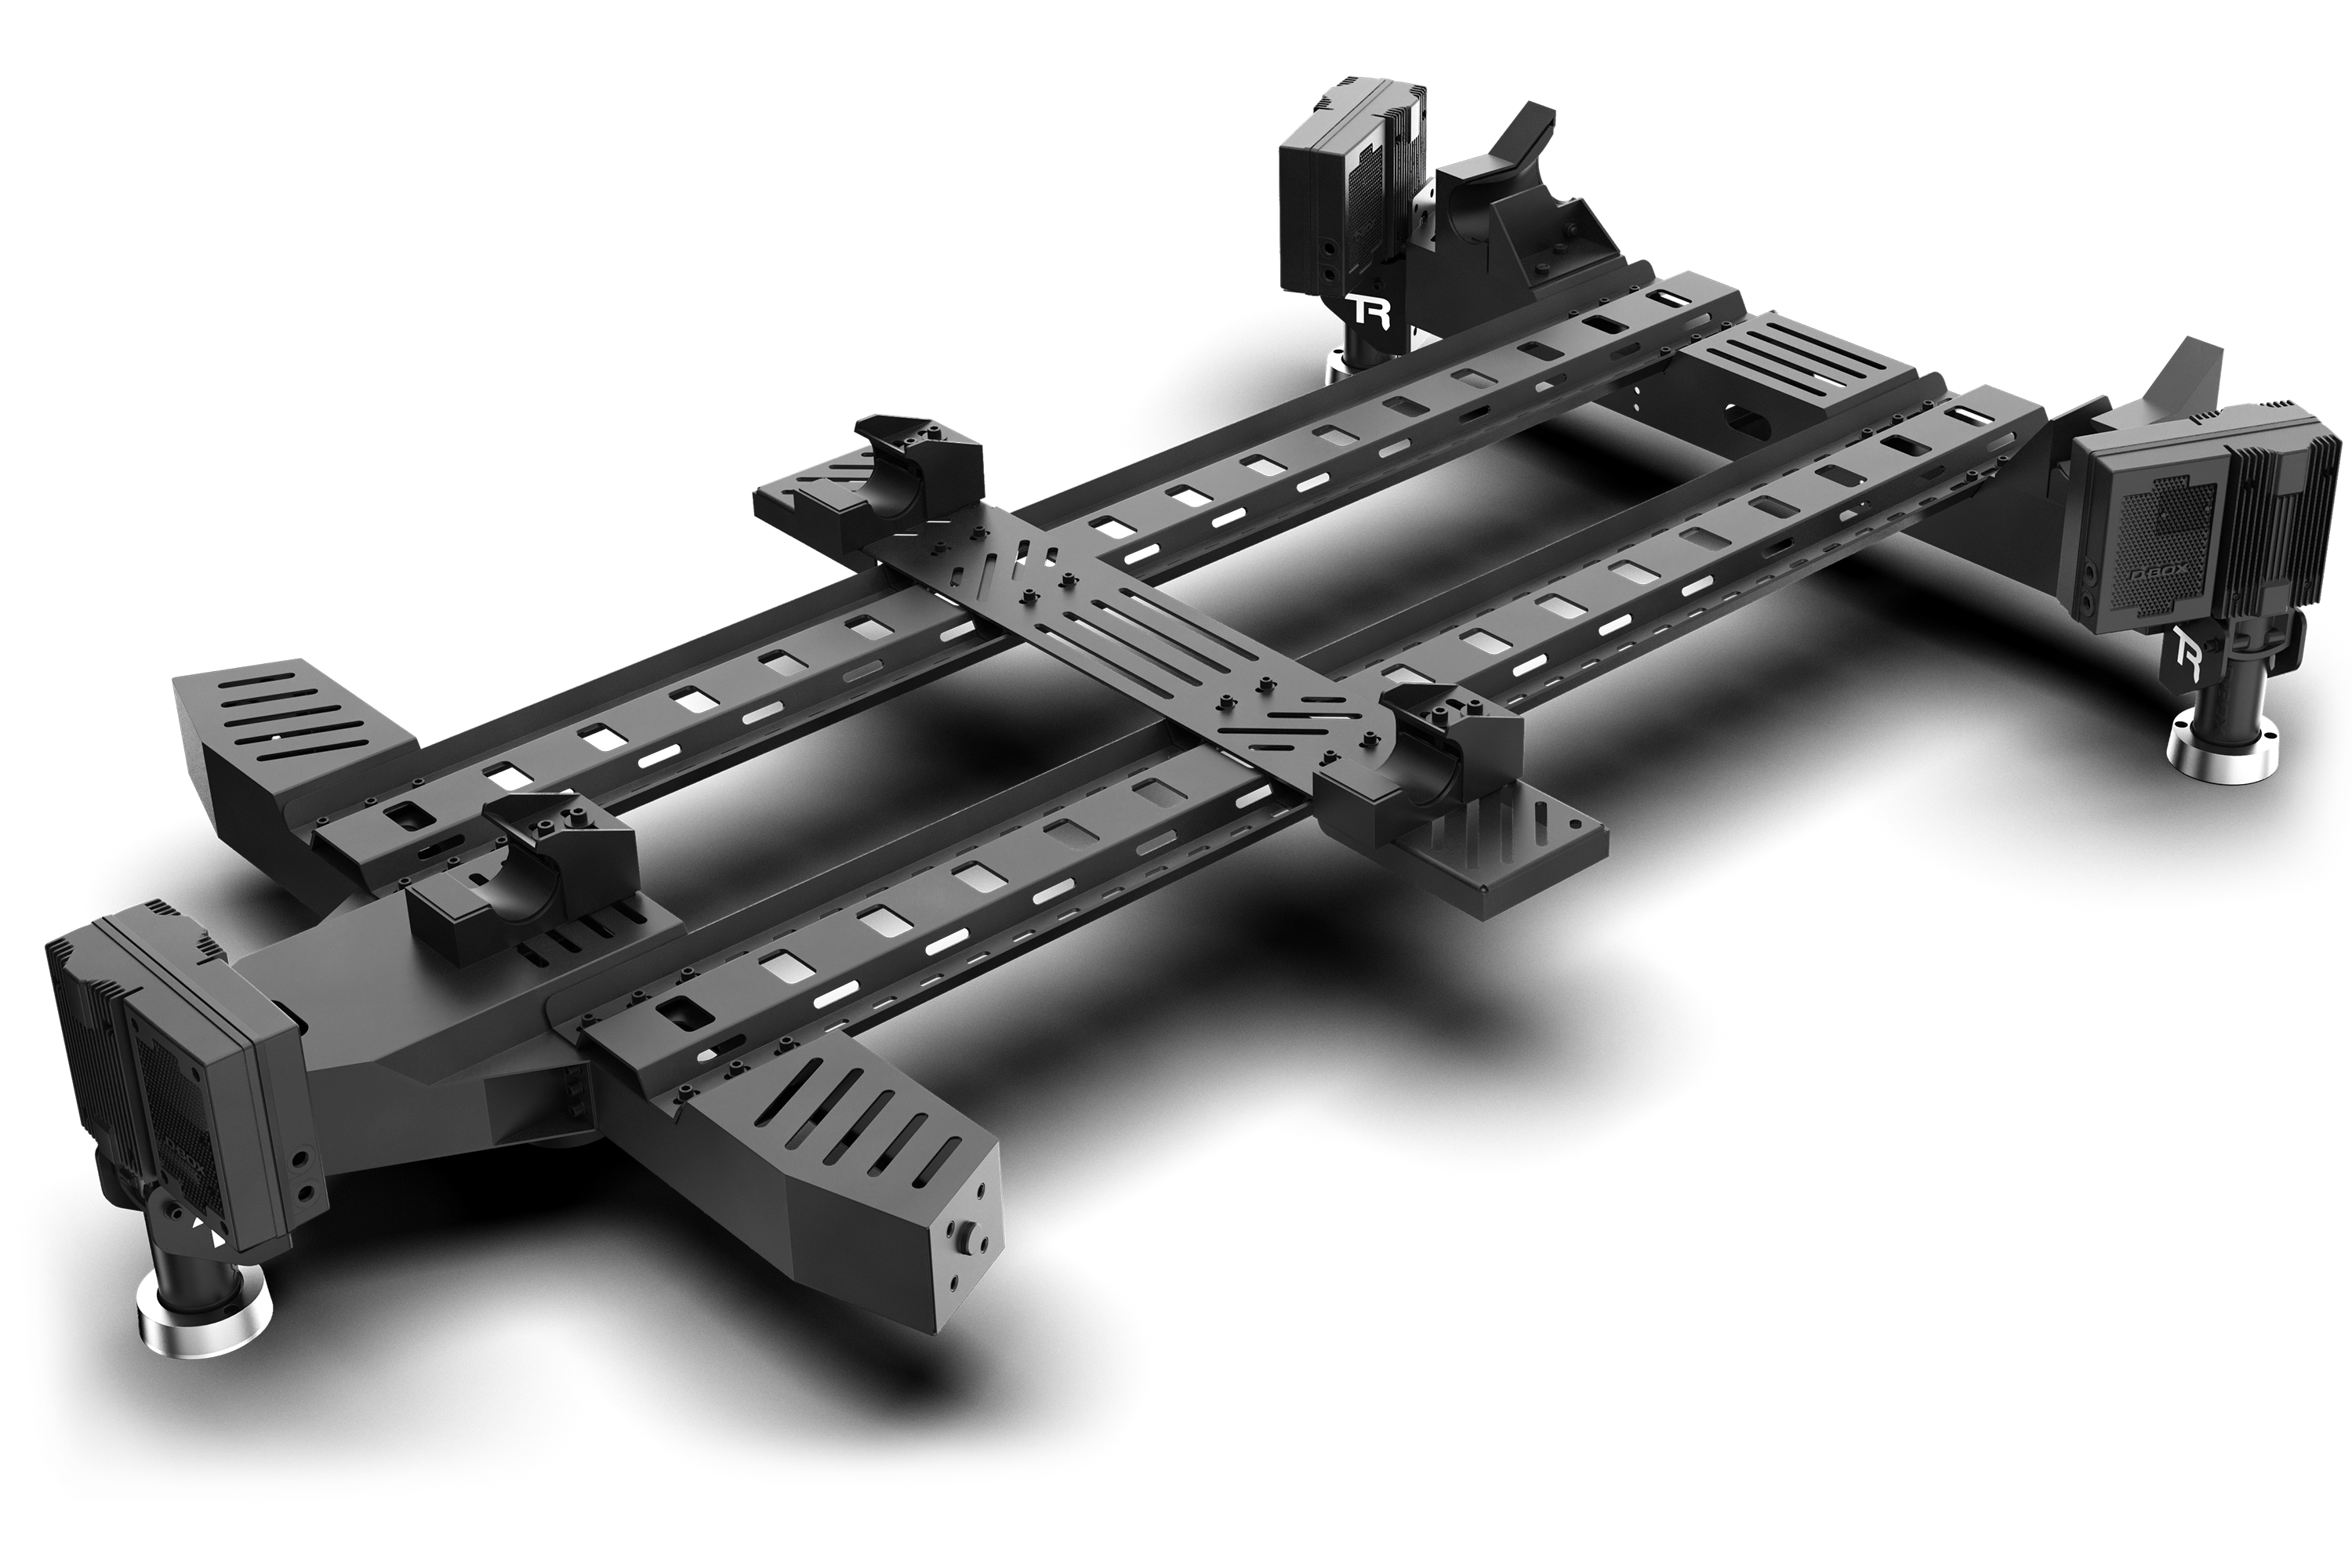 Motion System with 3 motors/actuators and Motion Sim Base